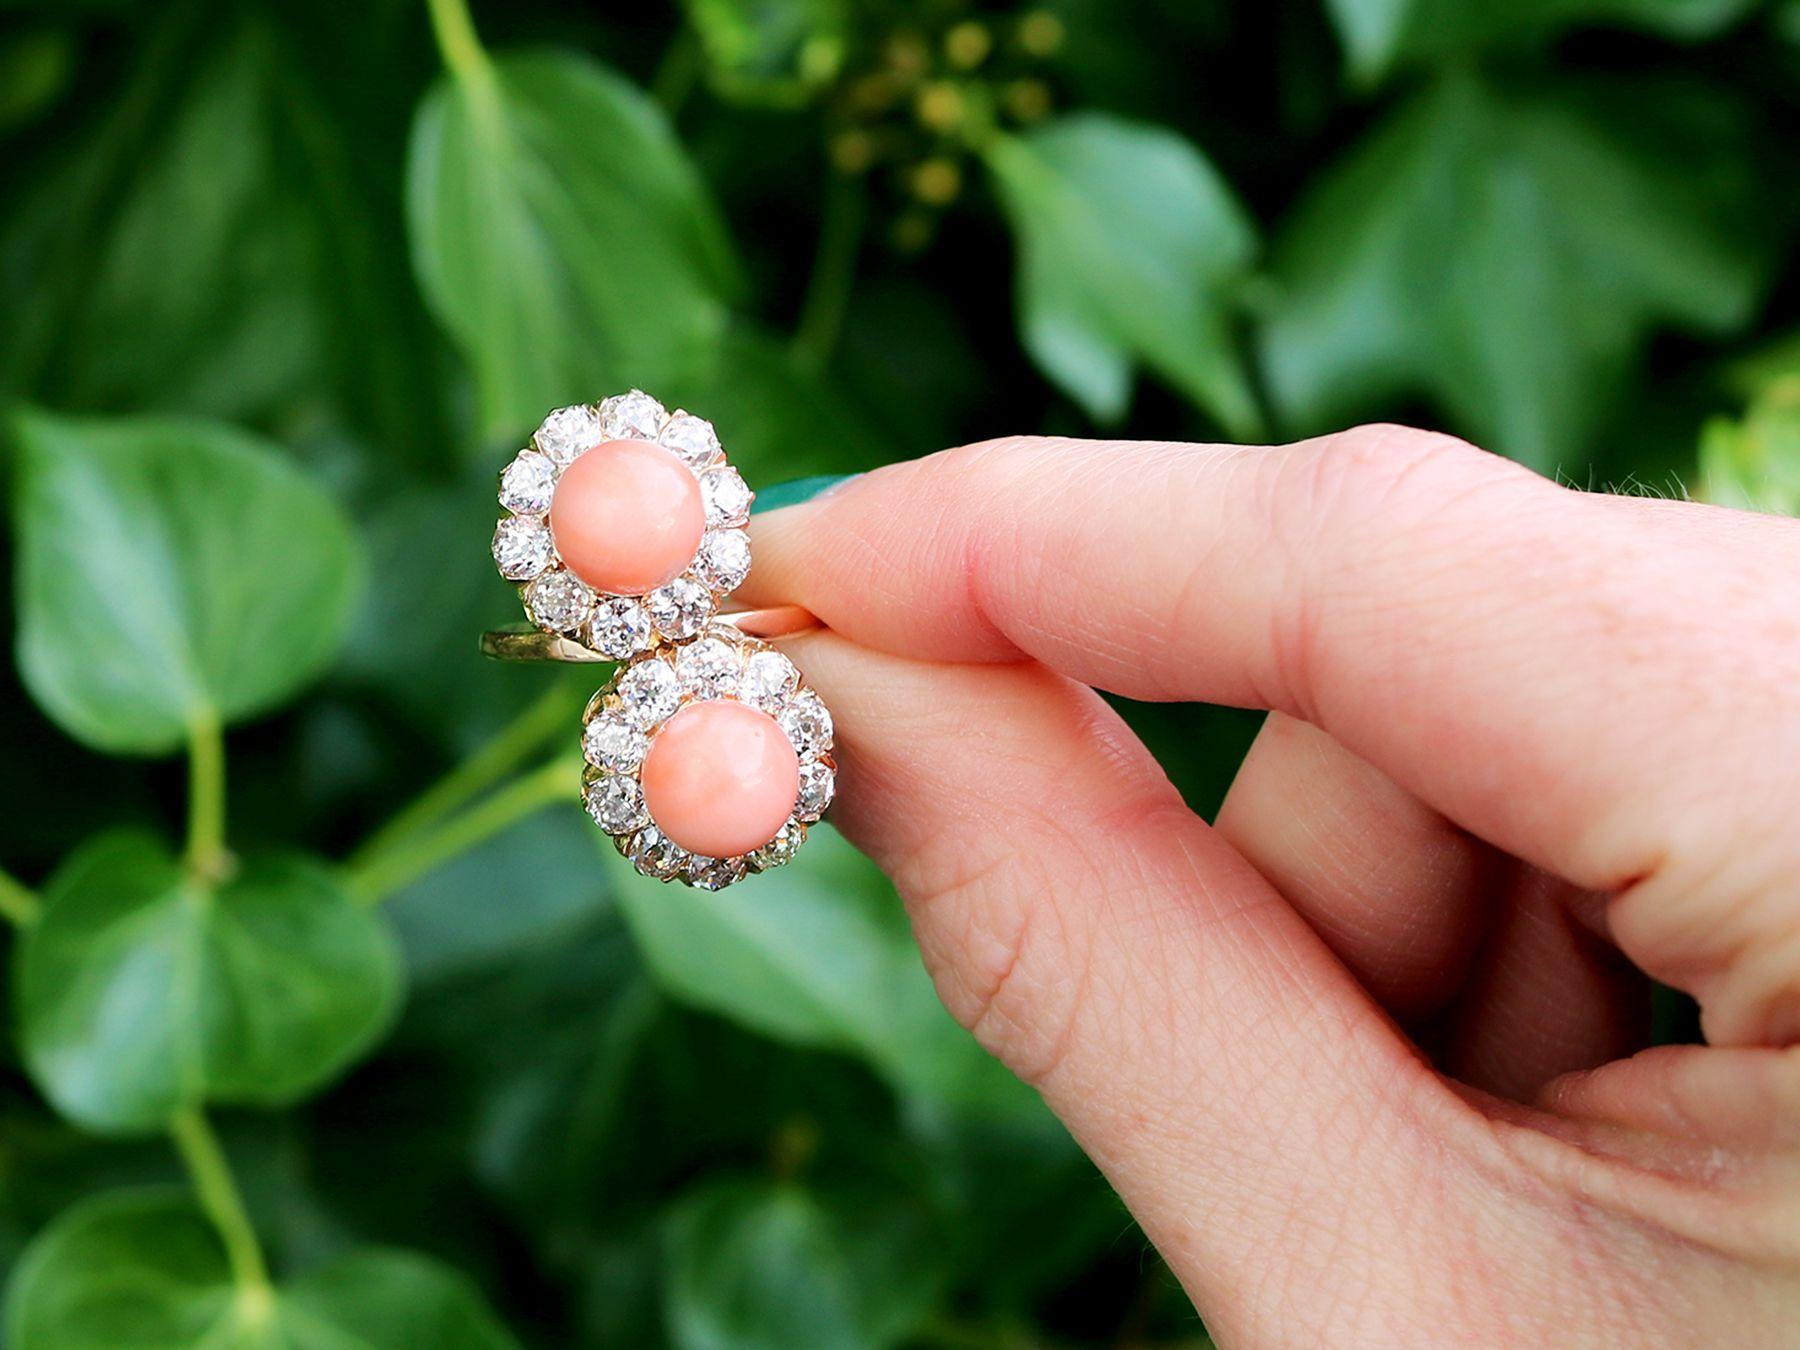 A stunning antique 6.06 carat coral and 2.86 carat diamond, 18 karat rose gold dress ring; part of our diverse antique jewelry and estate jewelry collections.

This stunning, fine and impressive antique coral ring has been crafted in 18k rose